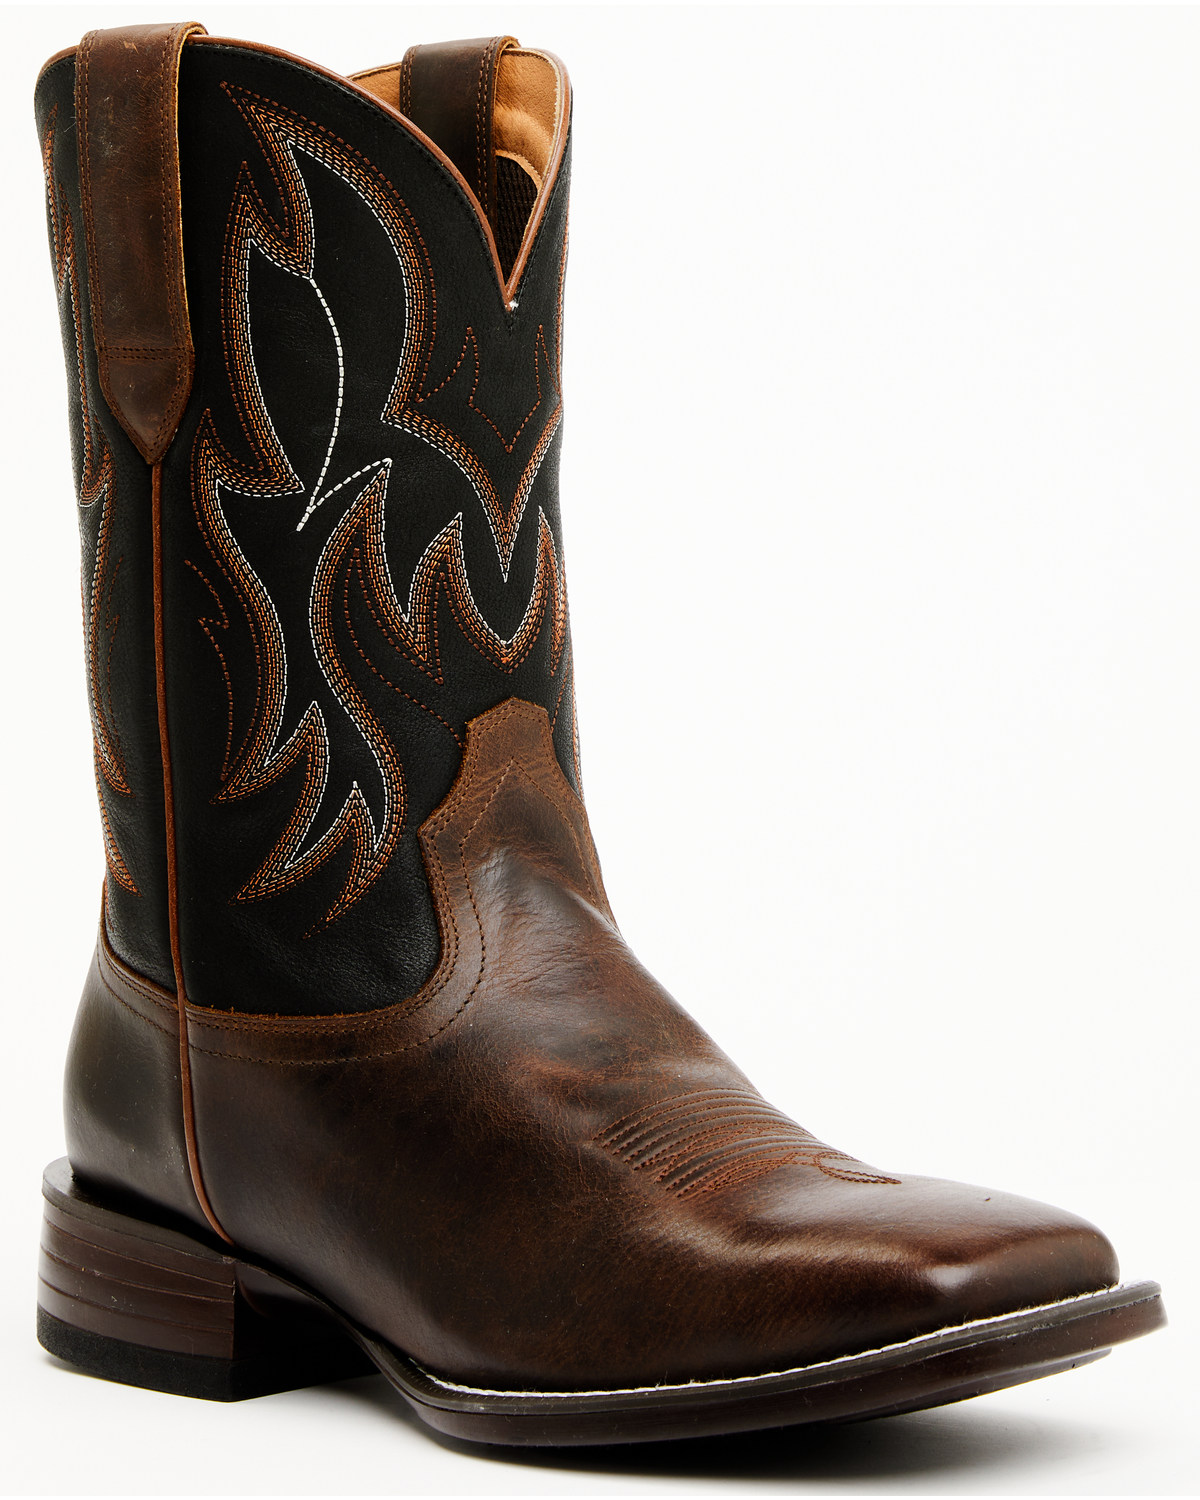 Cody James Men's Hoverfly Performance Western Boots - Broad Square Toe